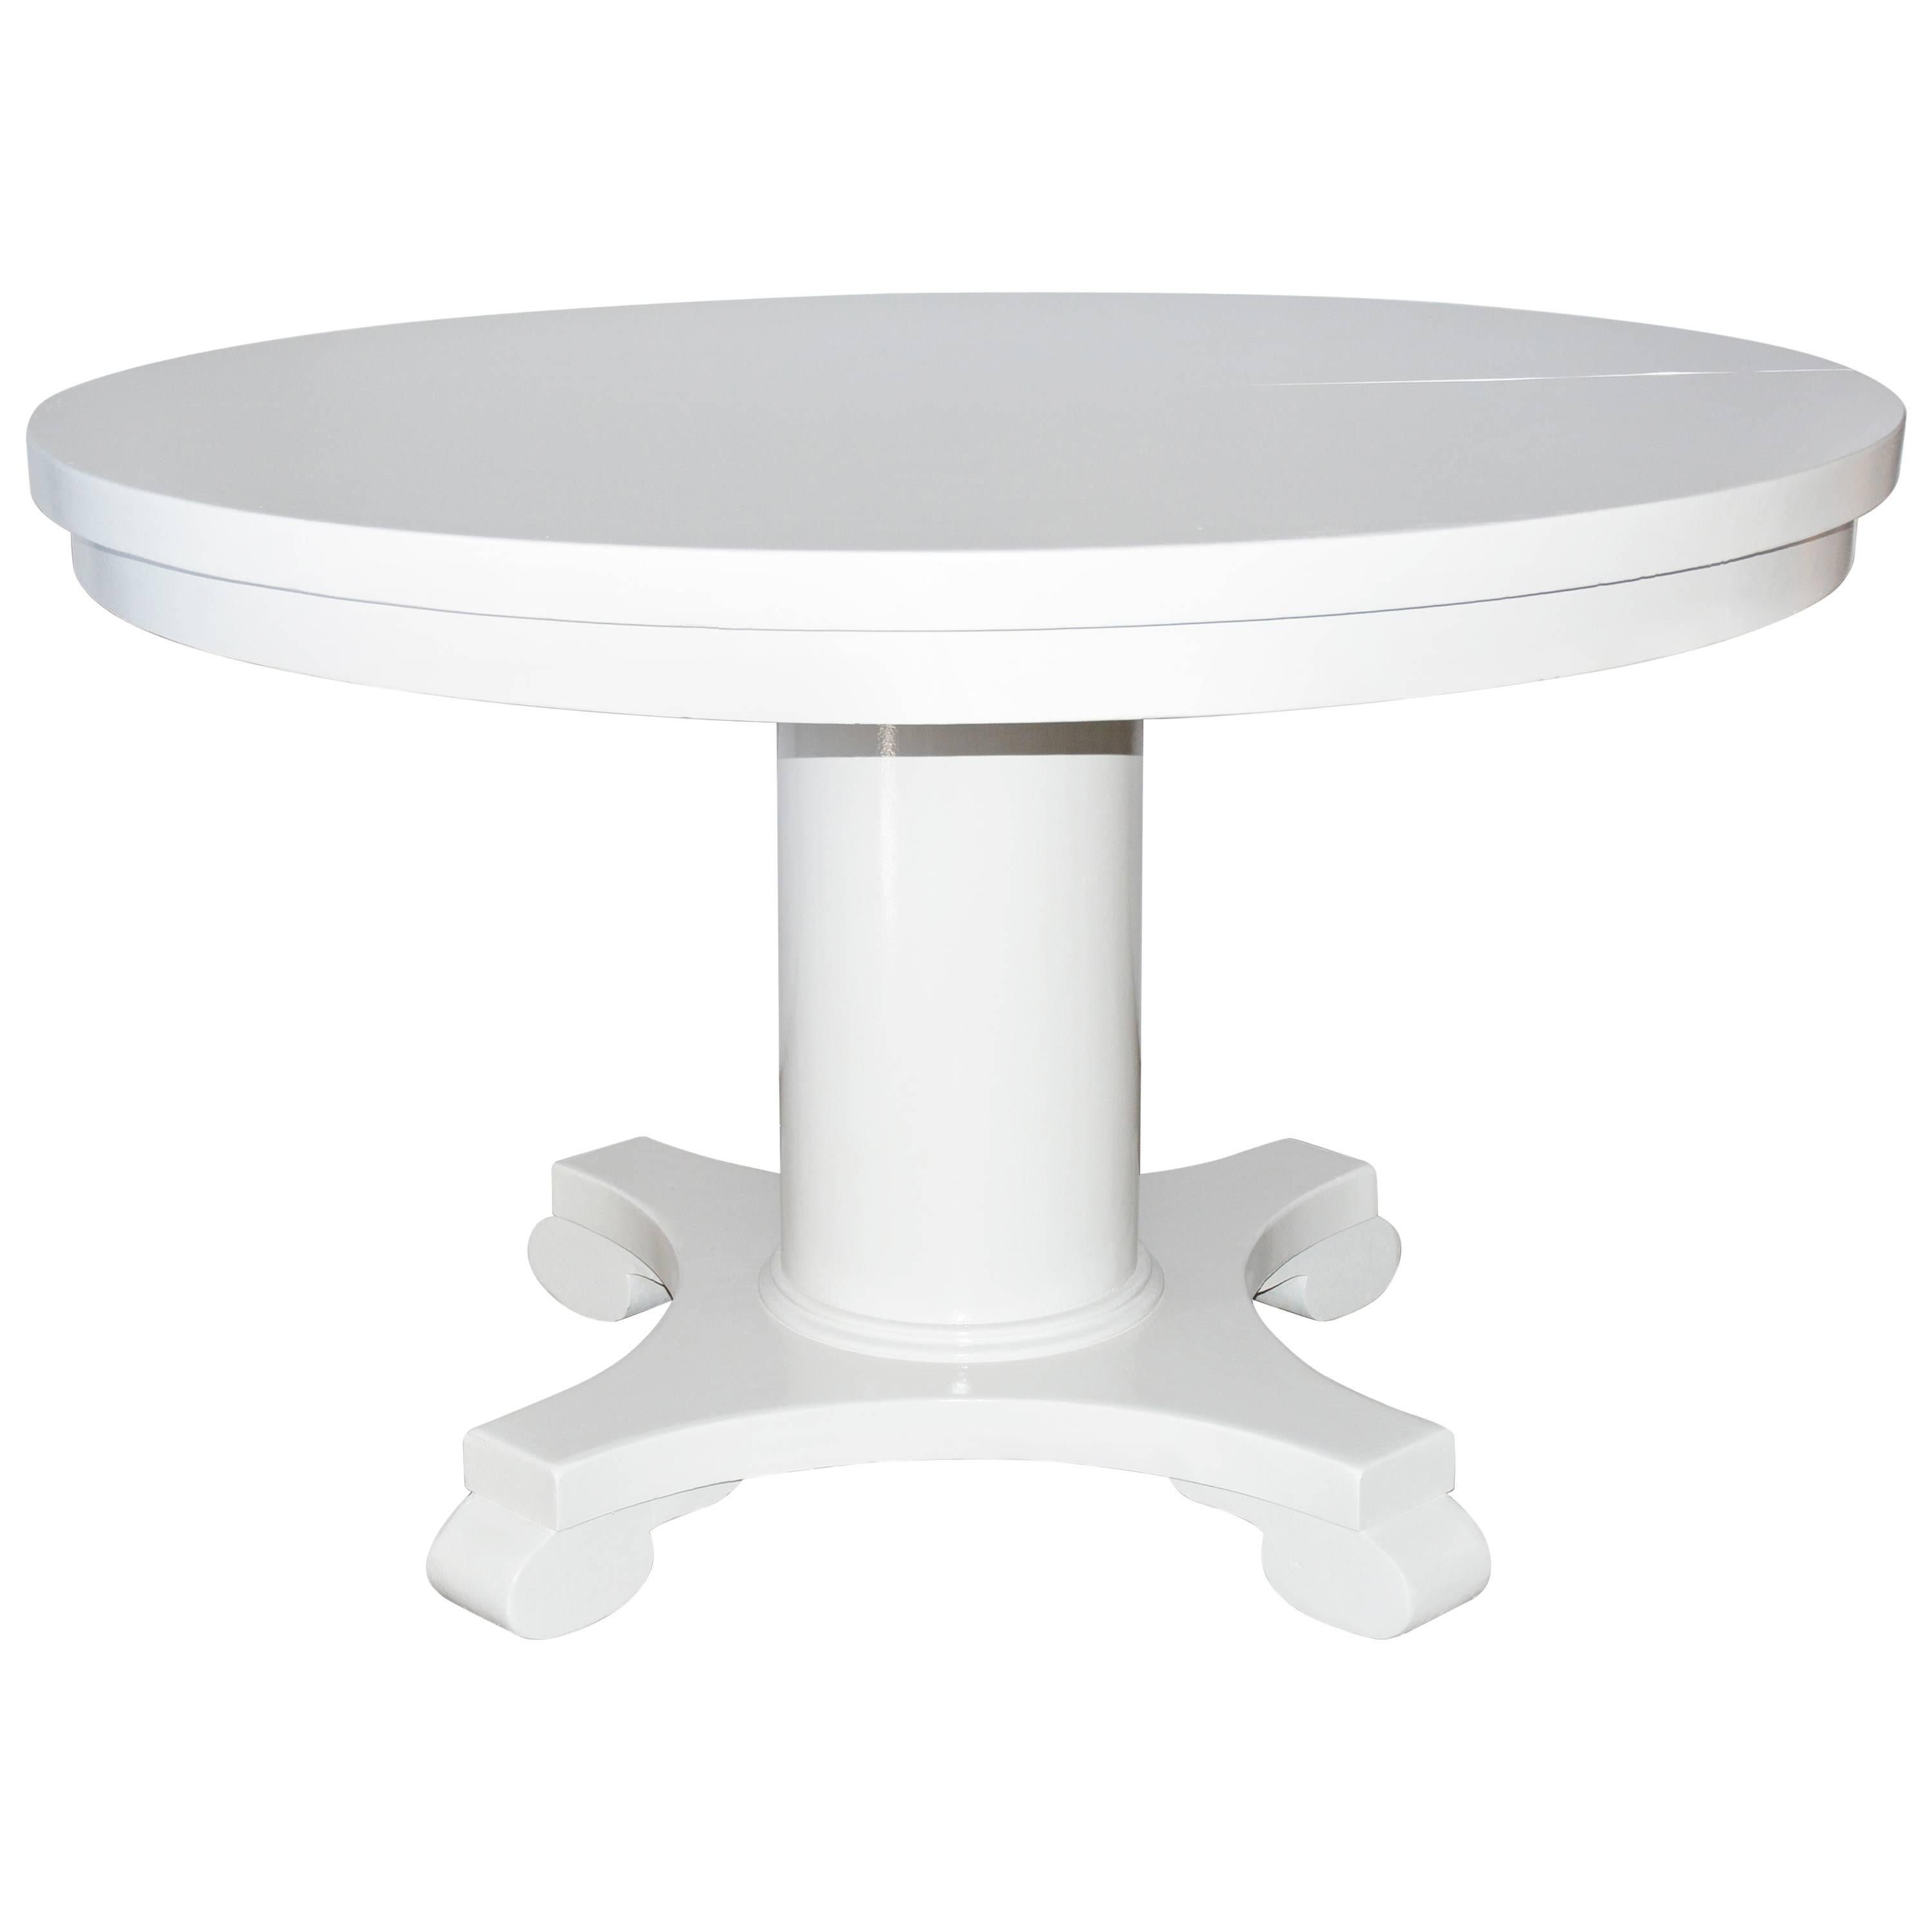 Round Empire Centre Pedestal Painted Dining Table